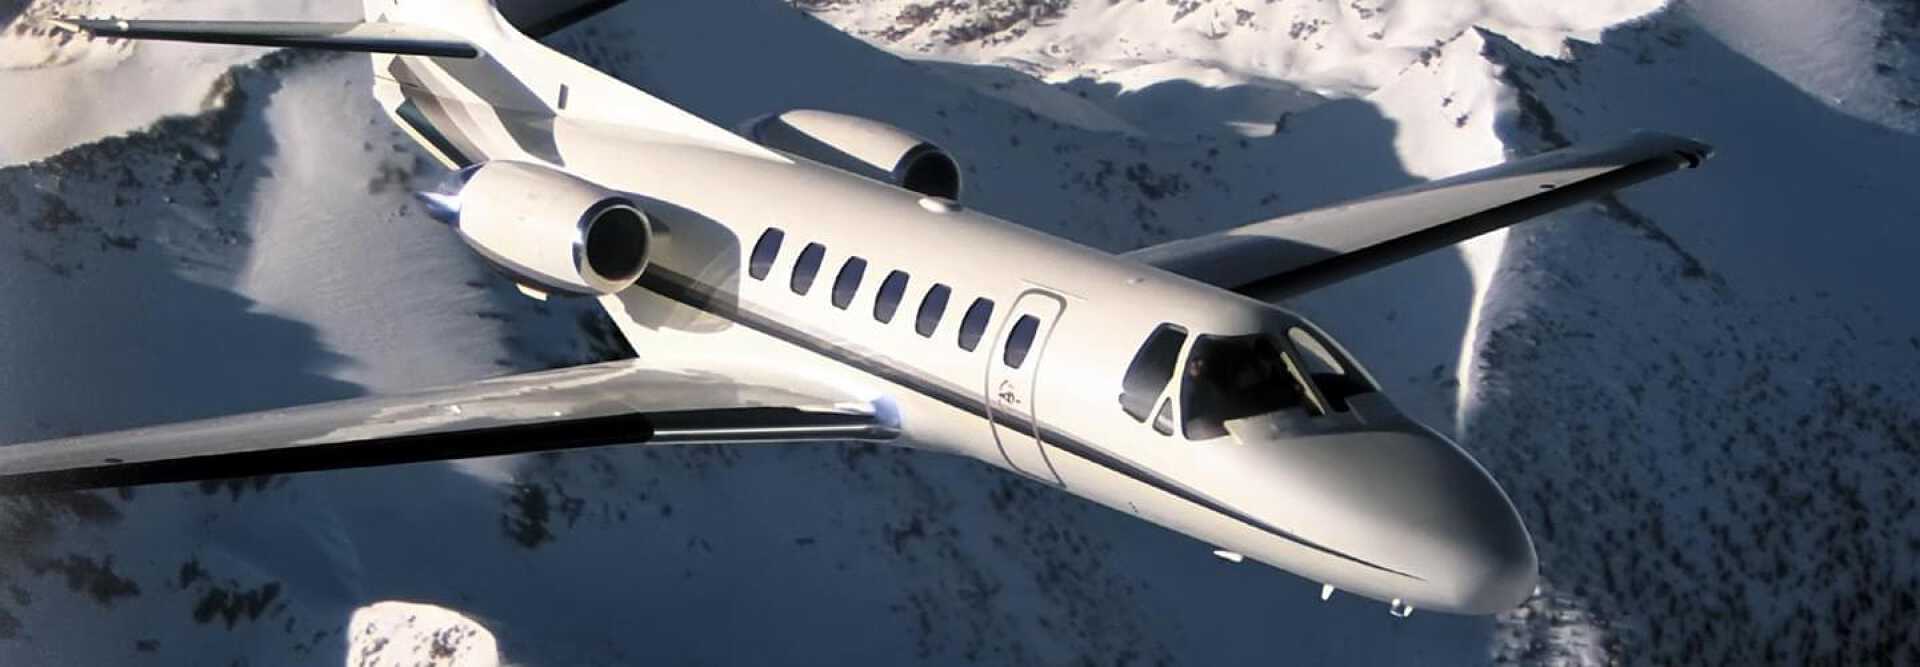 Midsize Jet Cessna Citation V to charter for private aviation flights with LunaJets, for intercontinental flights offering comfort and space 